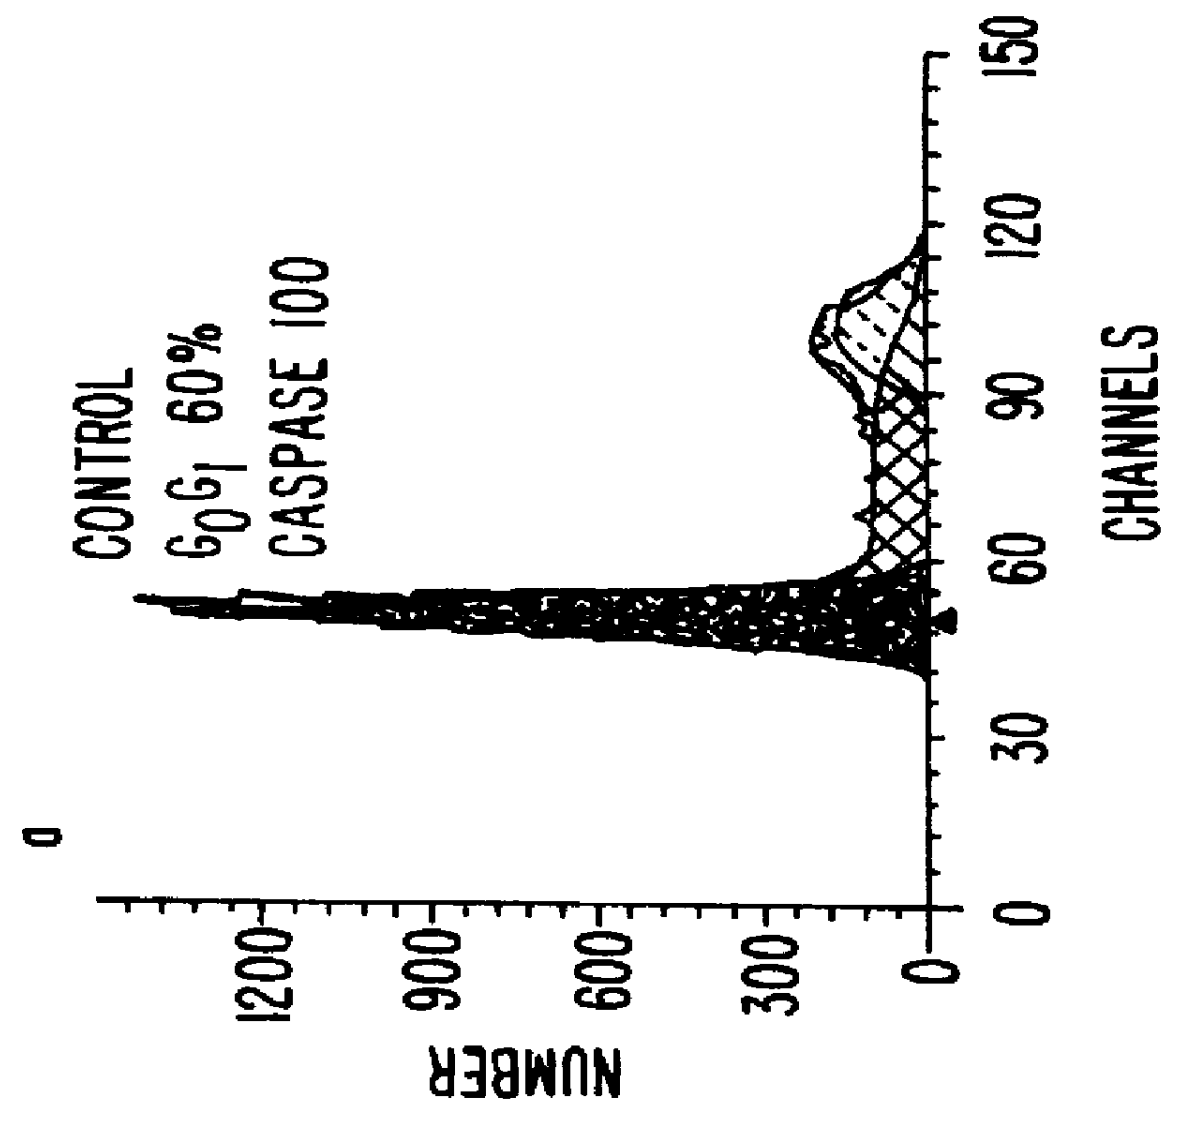 Indanone and tetralone compounds for inhibiting cell proliferation